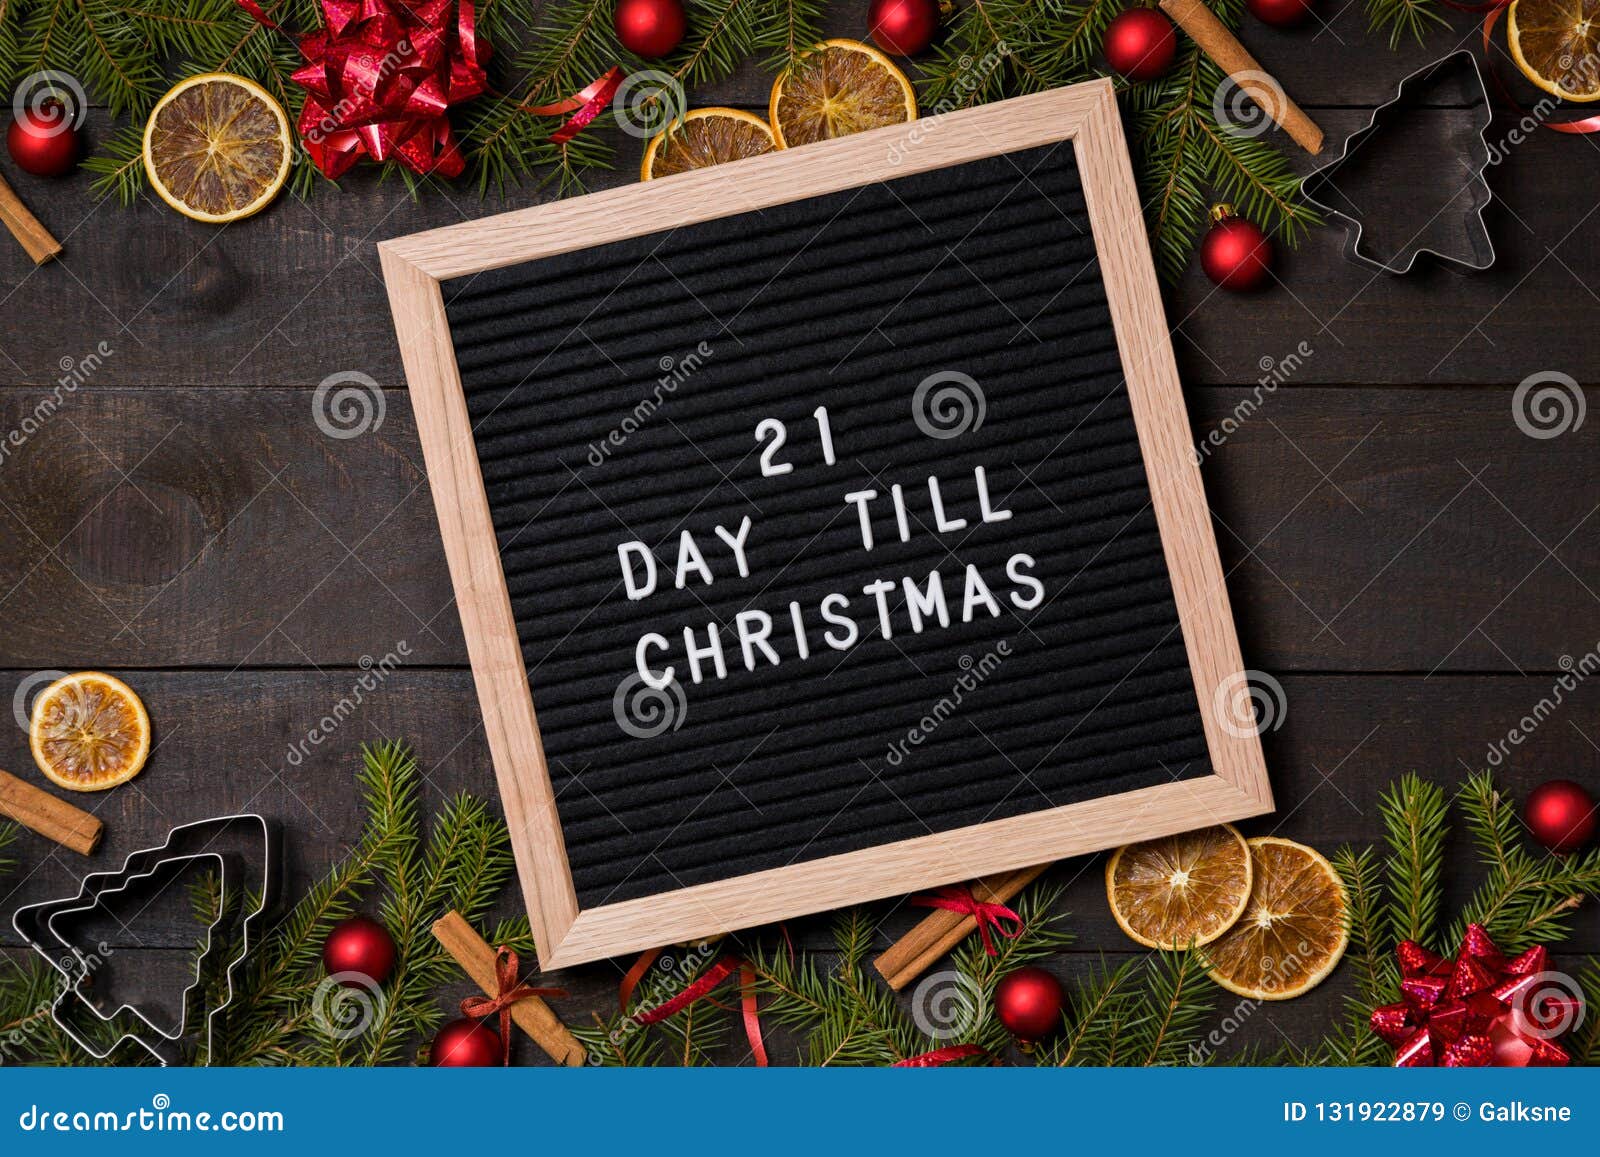 21 Day Till Christmas Countdown Letter Board on Dark Rustic Wood Stock